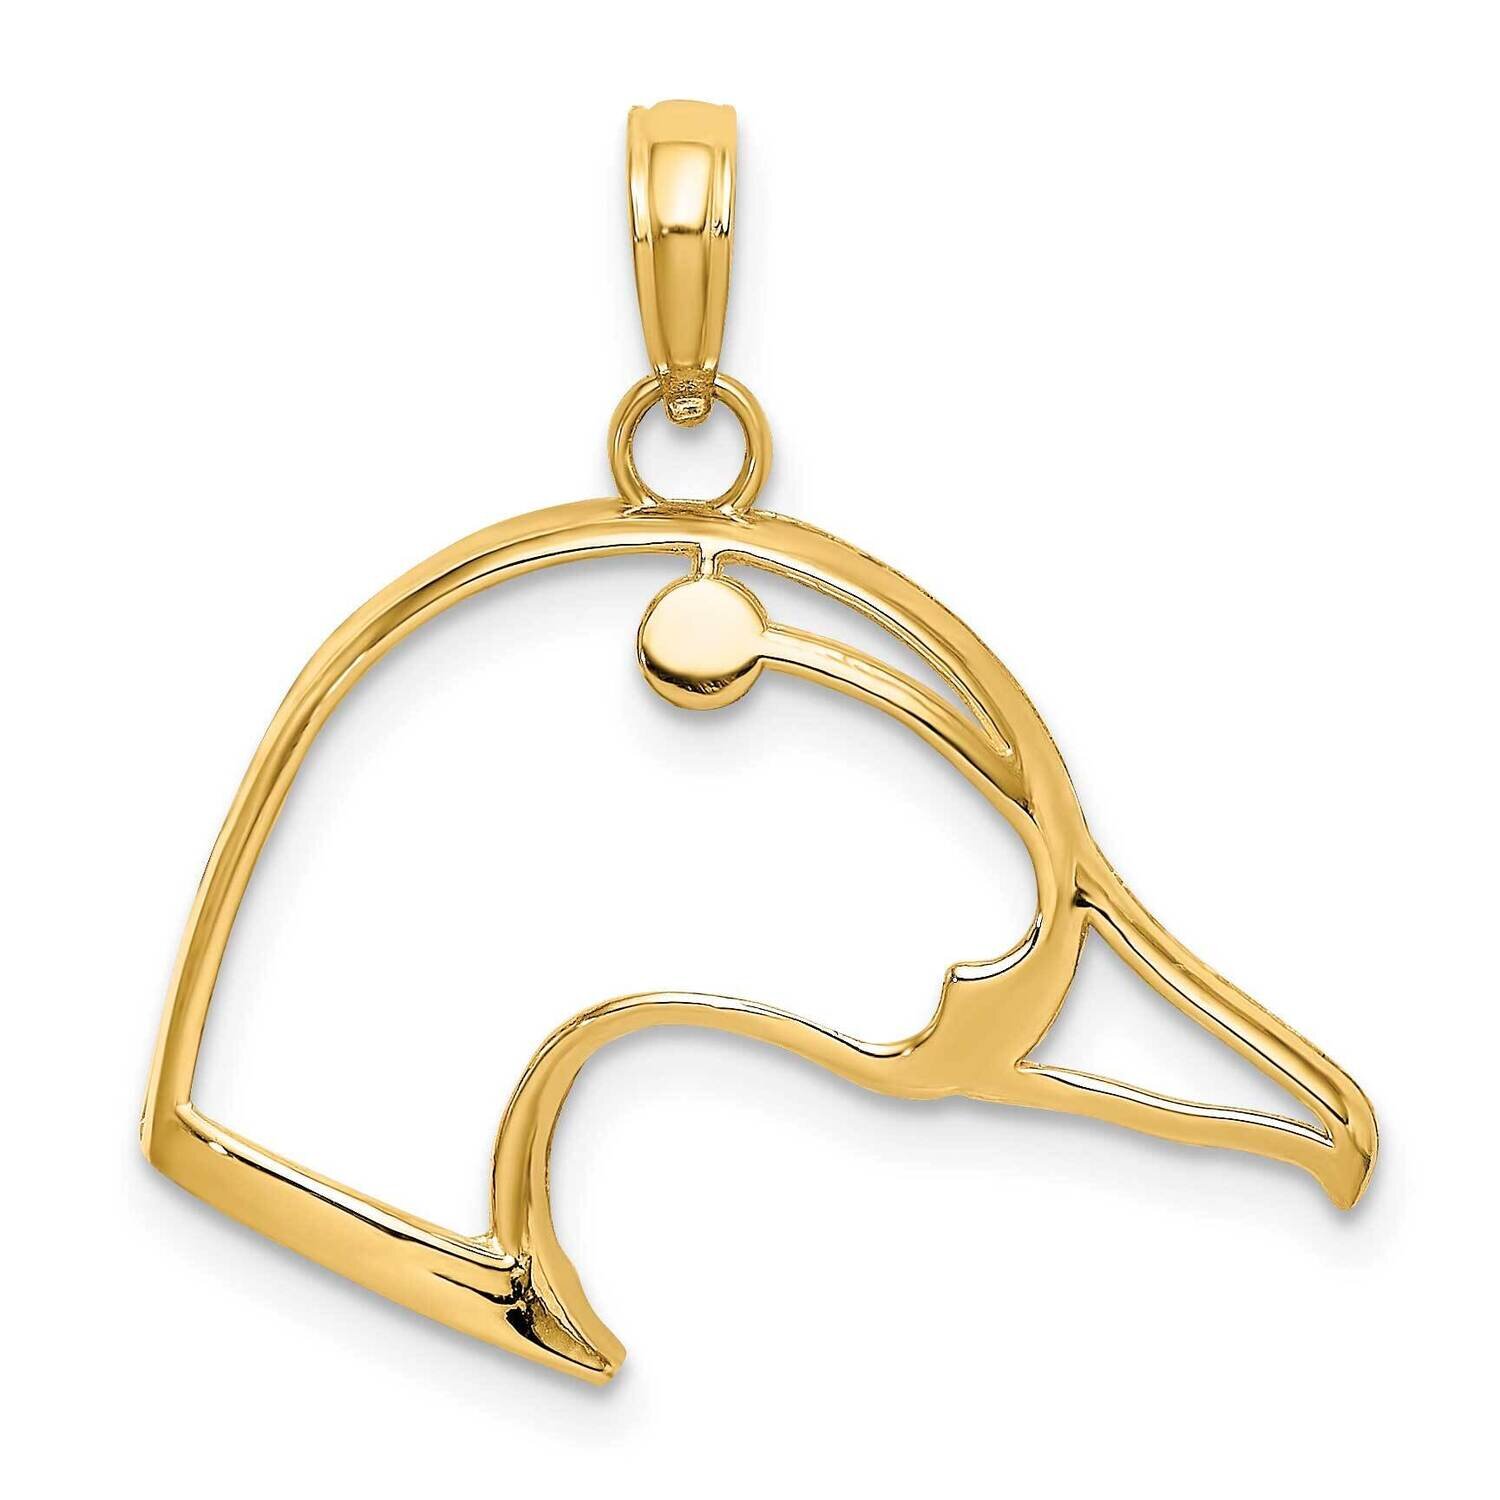 Beveled Duck Head Charm 14k Gold Cut-out K6441